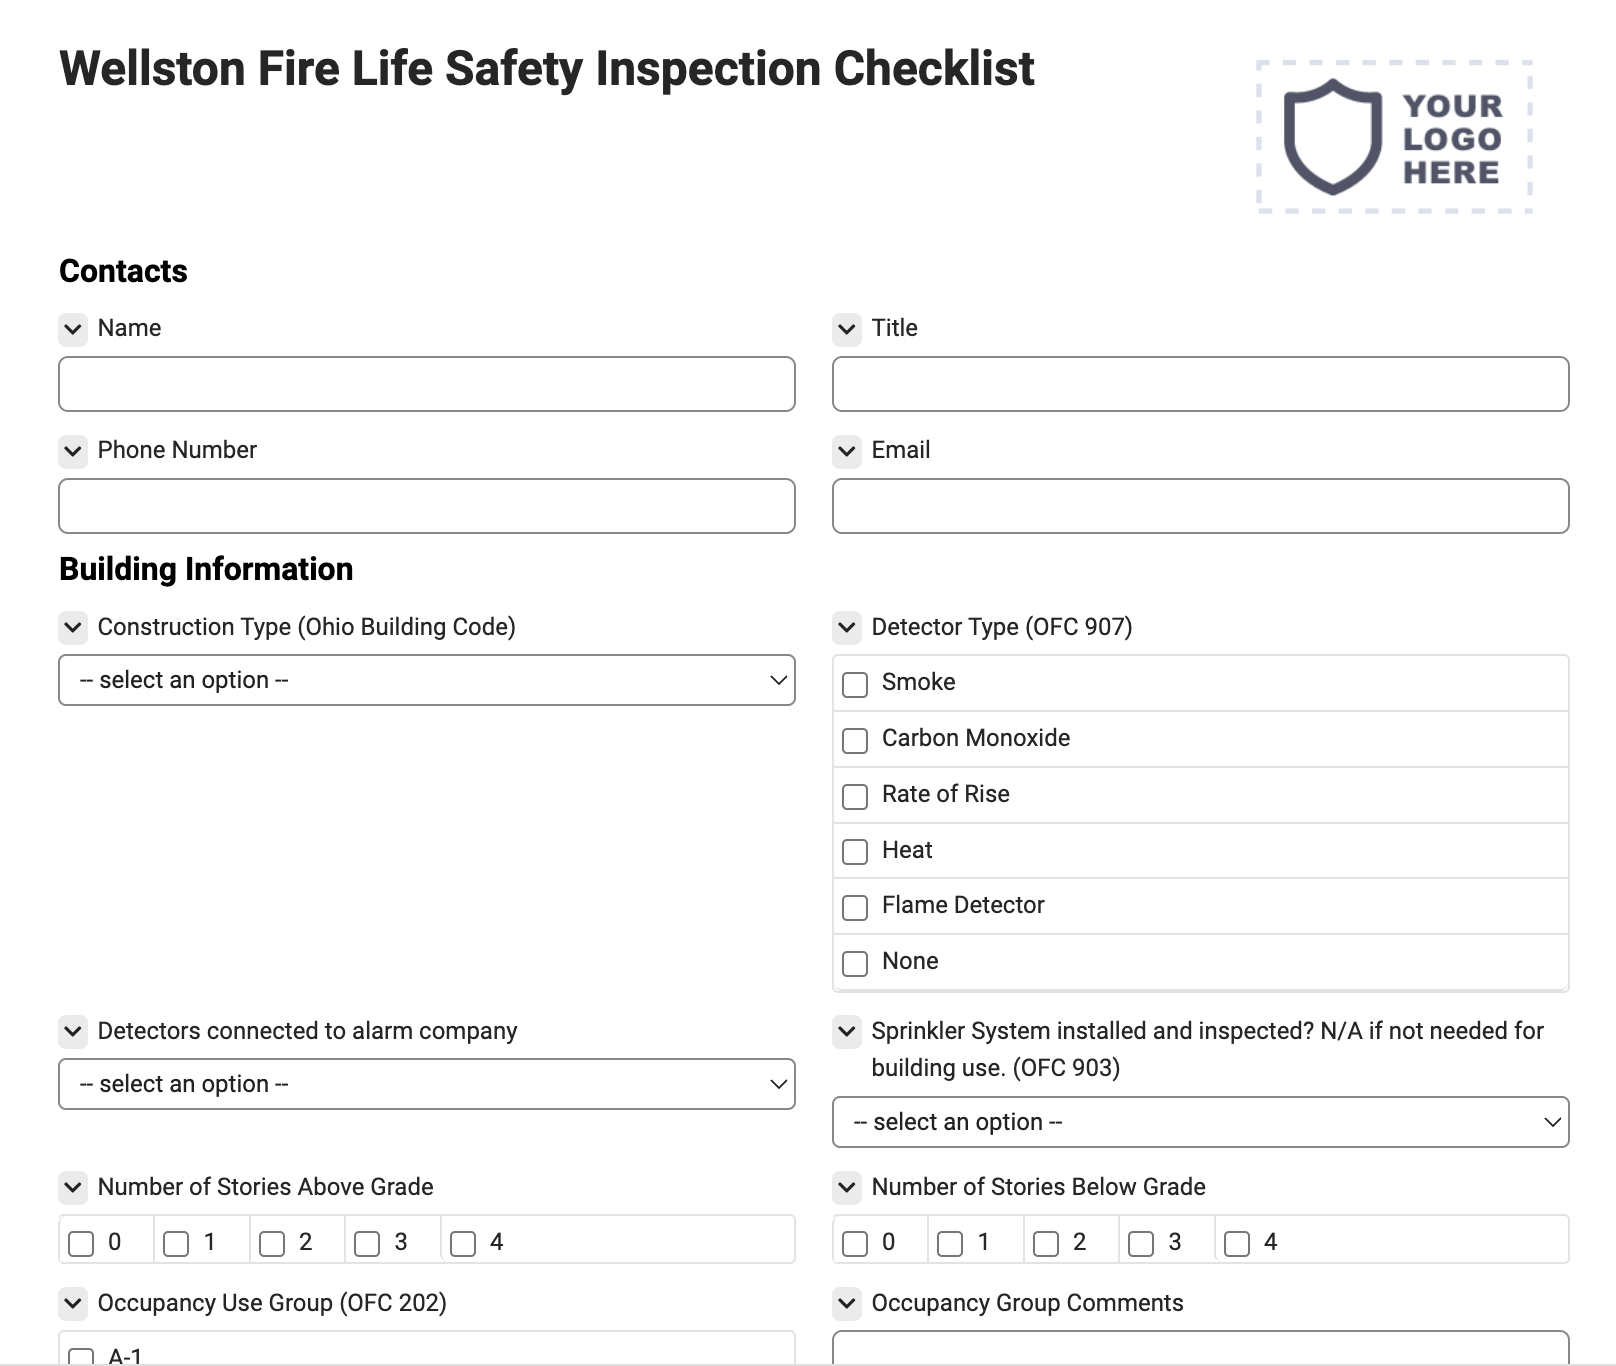 Wellston Fire Life Safety Inspection Checklist